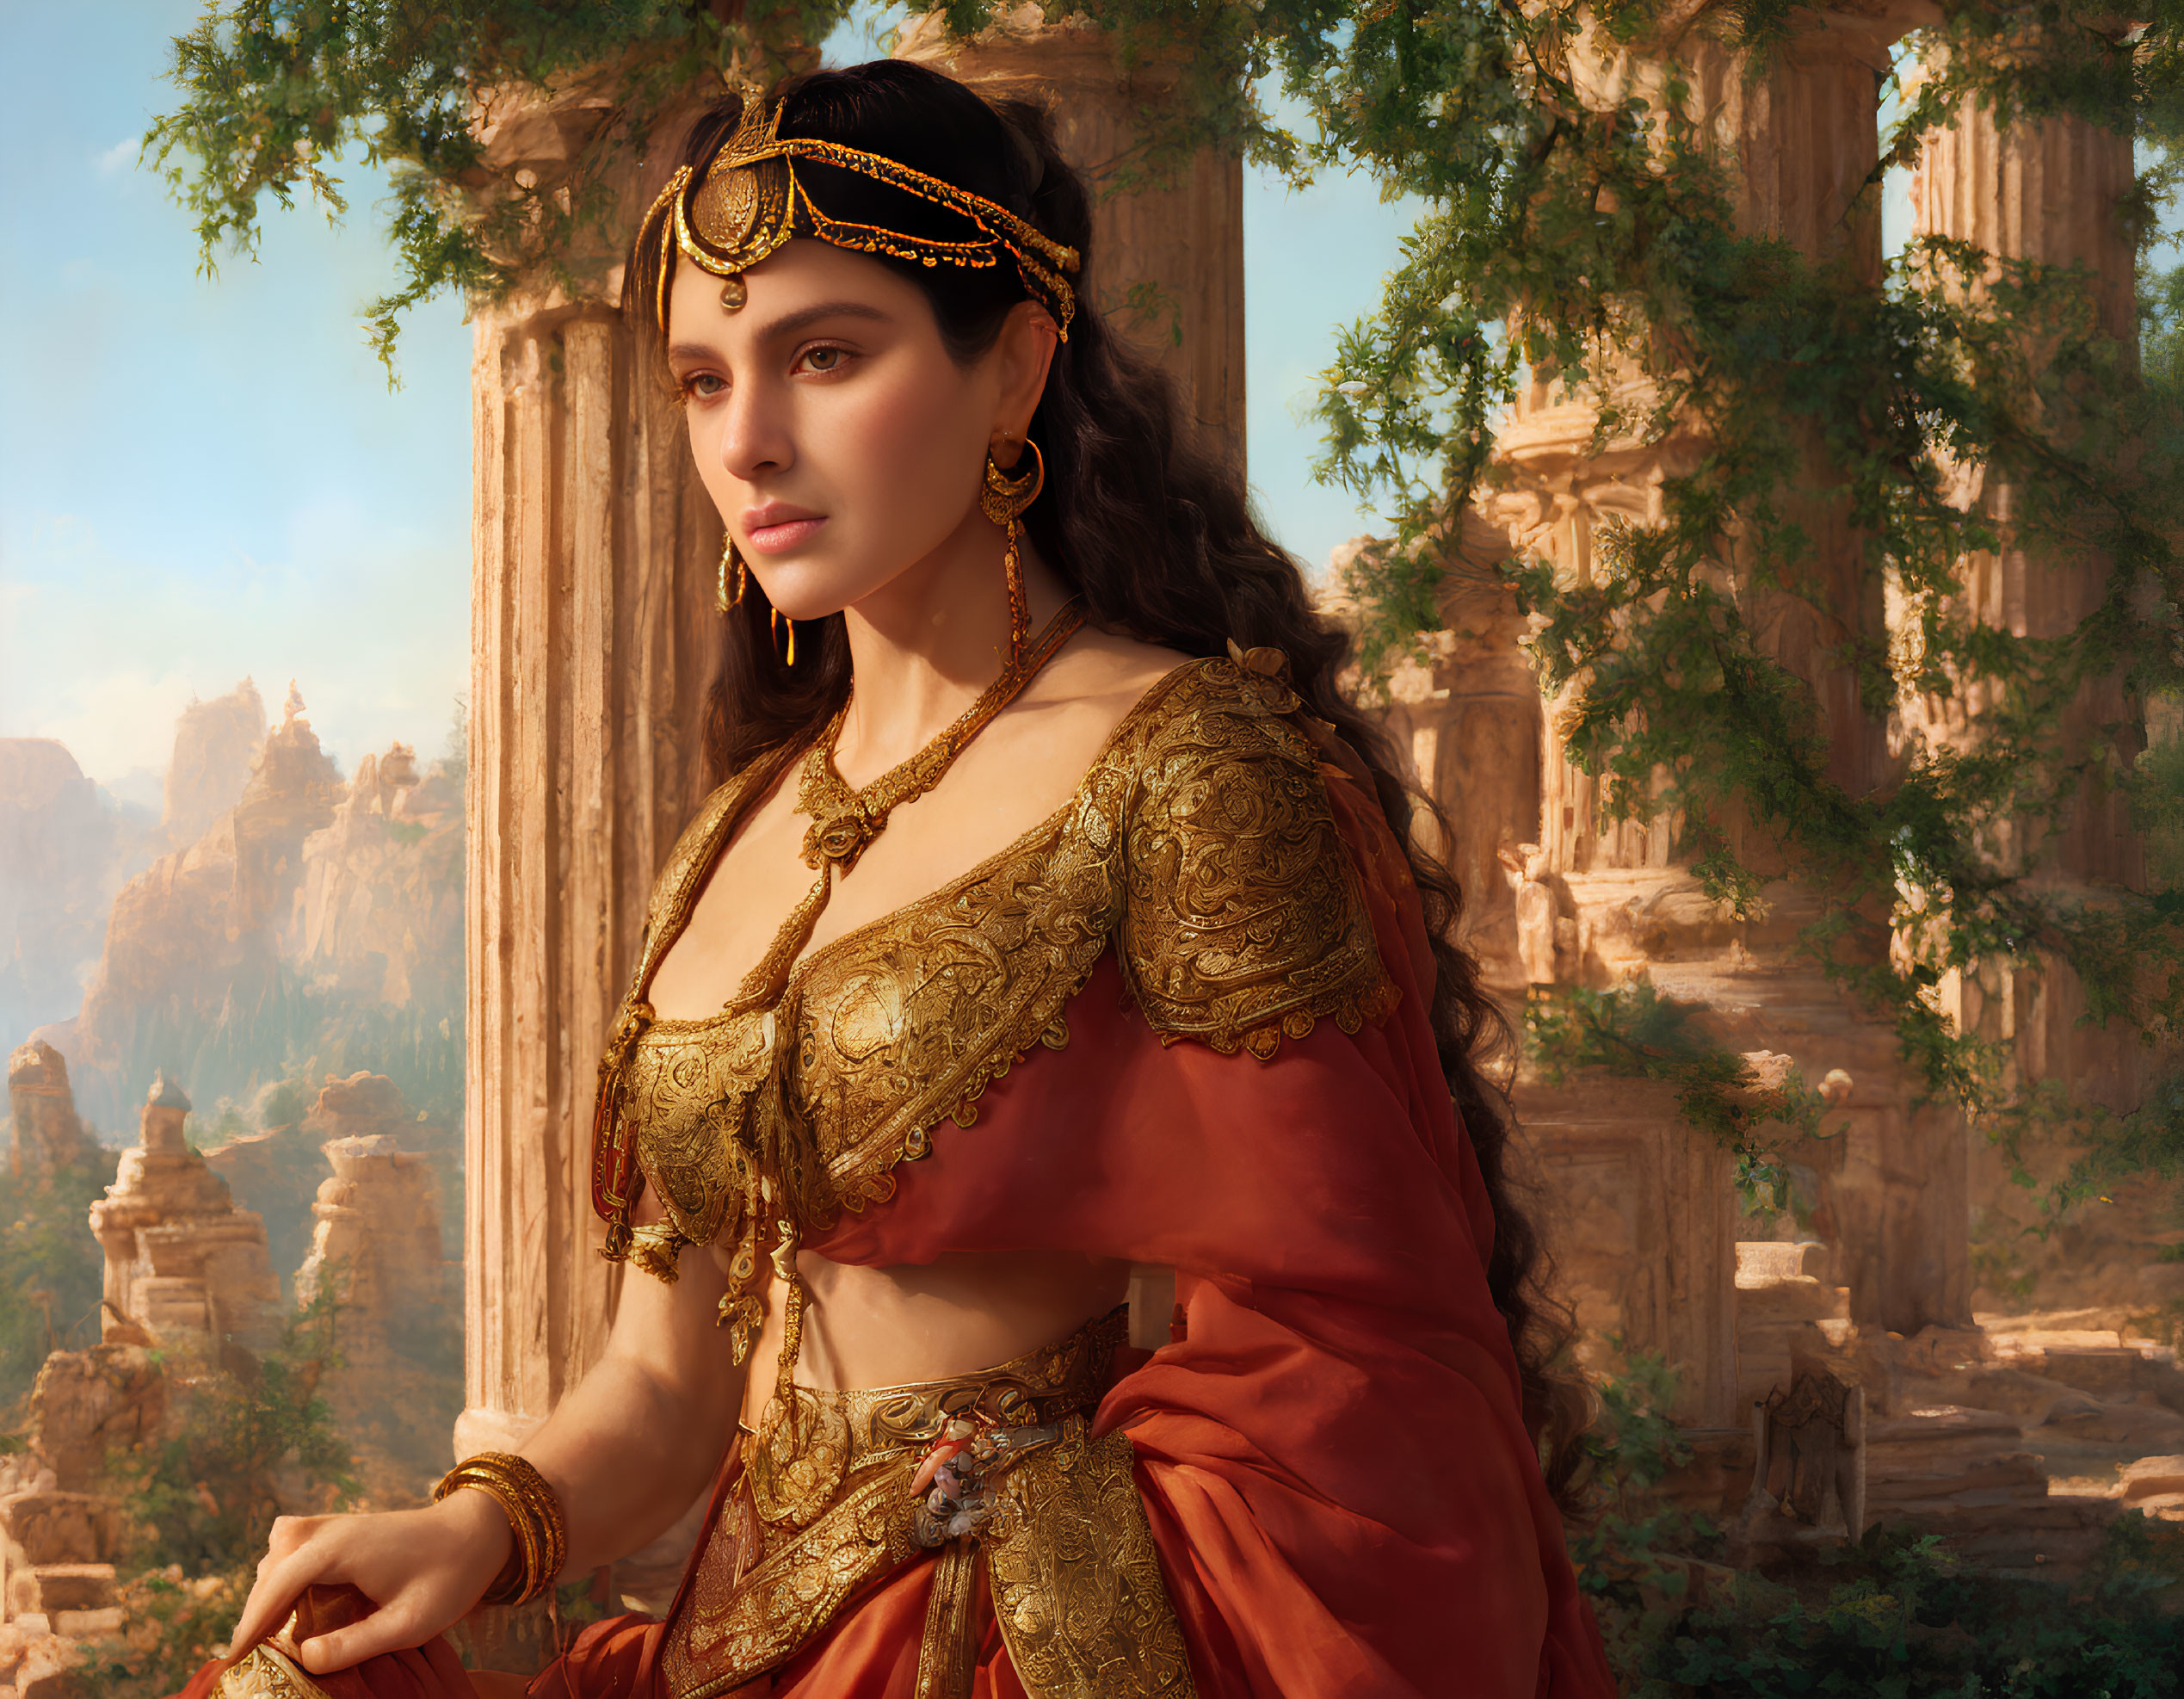 Regal woman in golden attire at ancient ruins in serene landscape